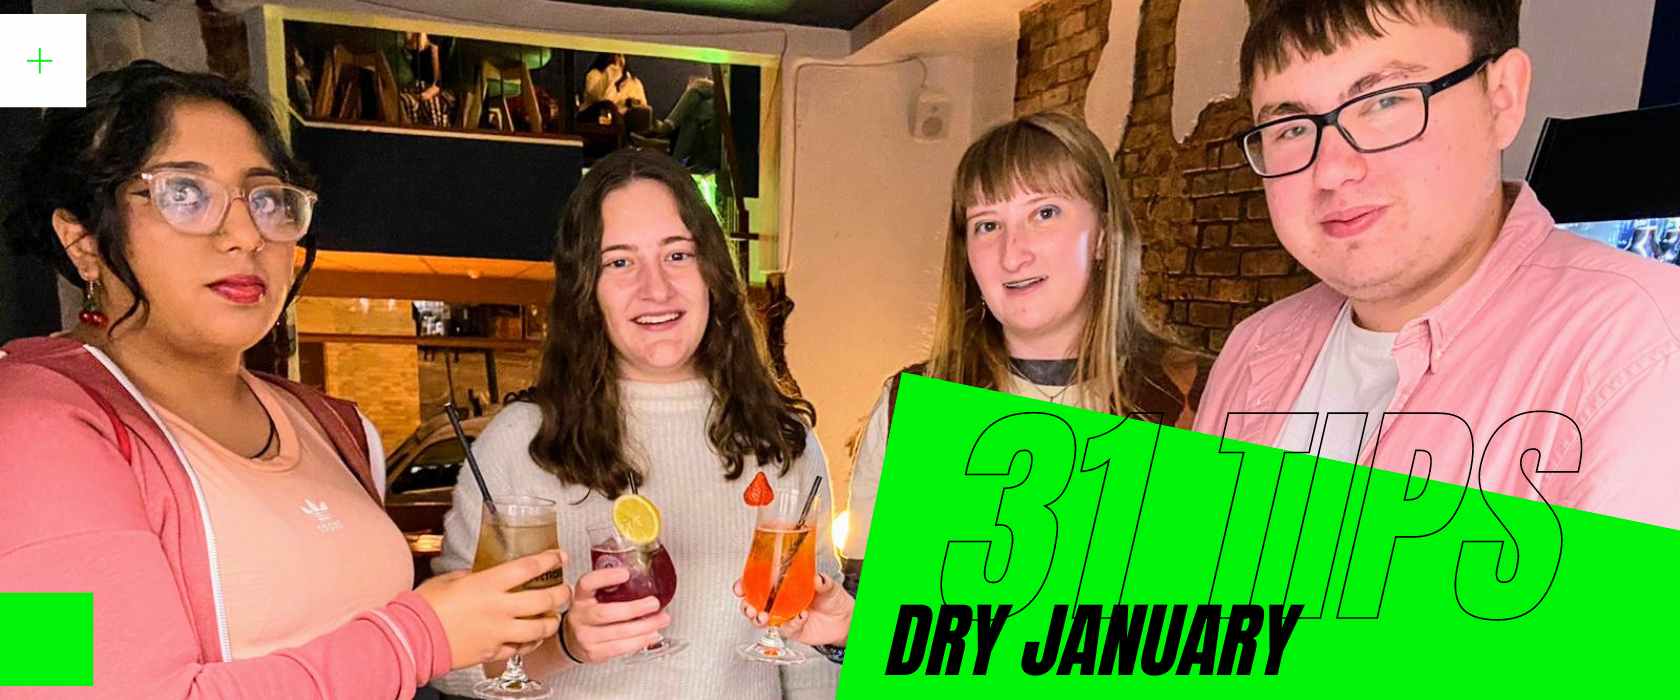 Dry January 31 Steps To A Healthier, Happier You